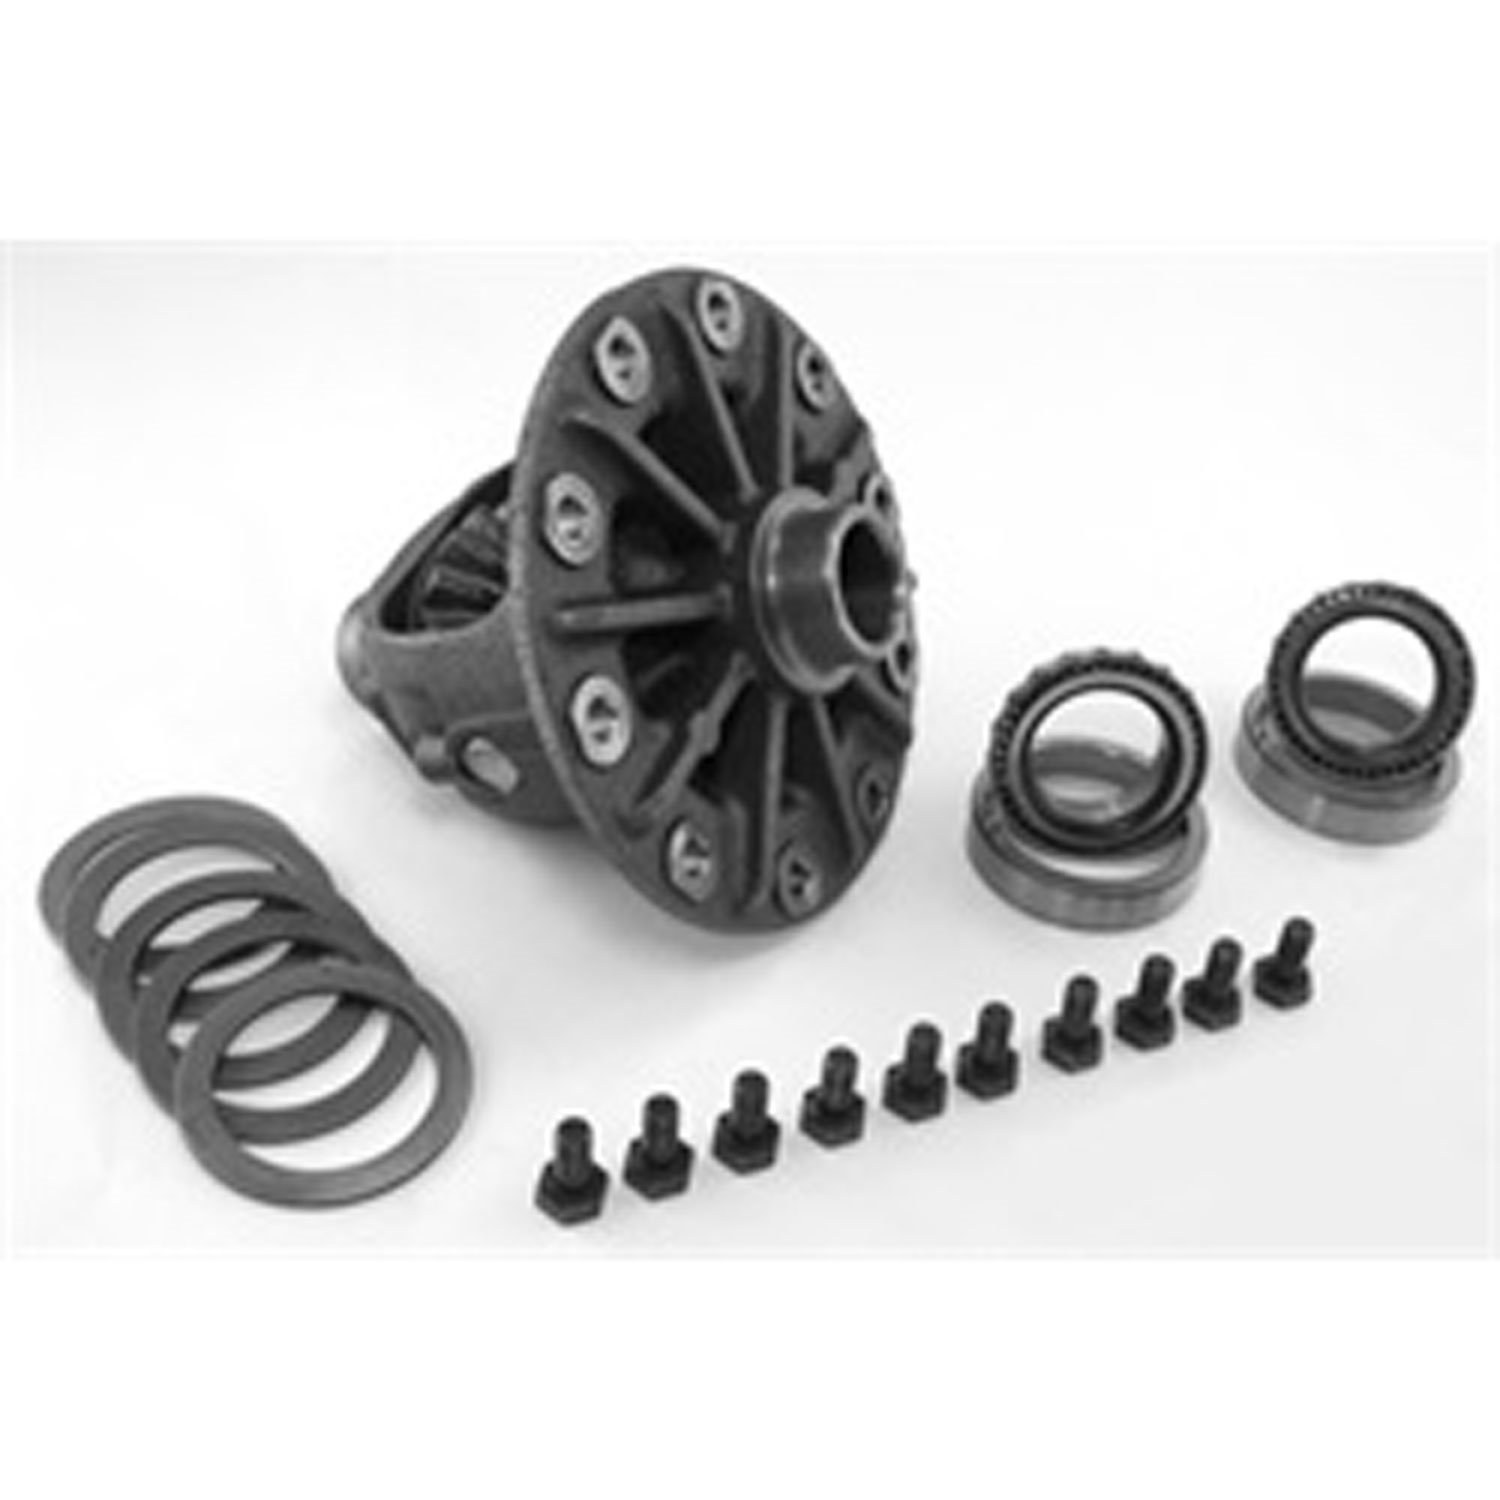 This differential carrier from Omix-ADA fits 87-05 Jeep Wrangler Cherokees Comanches and Grand Cherokees with Dana 35.